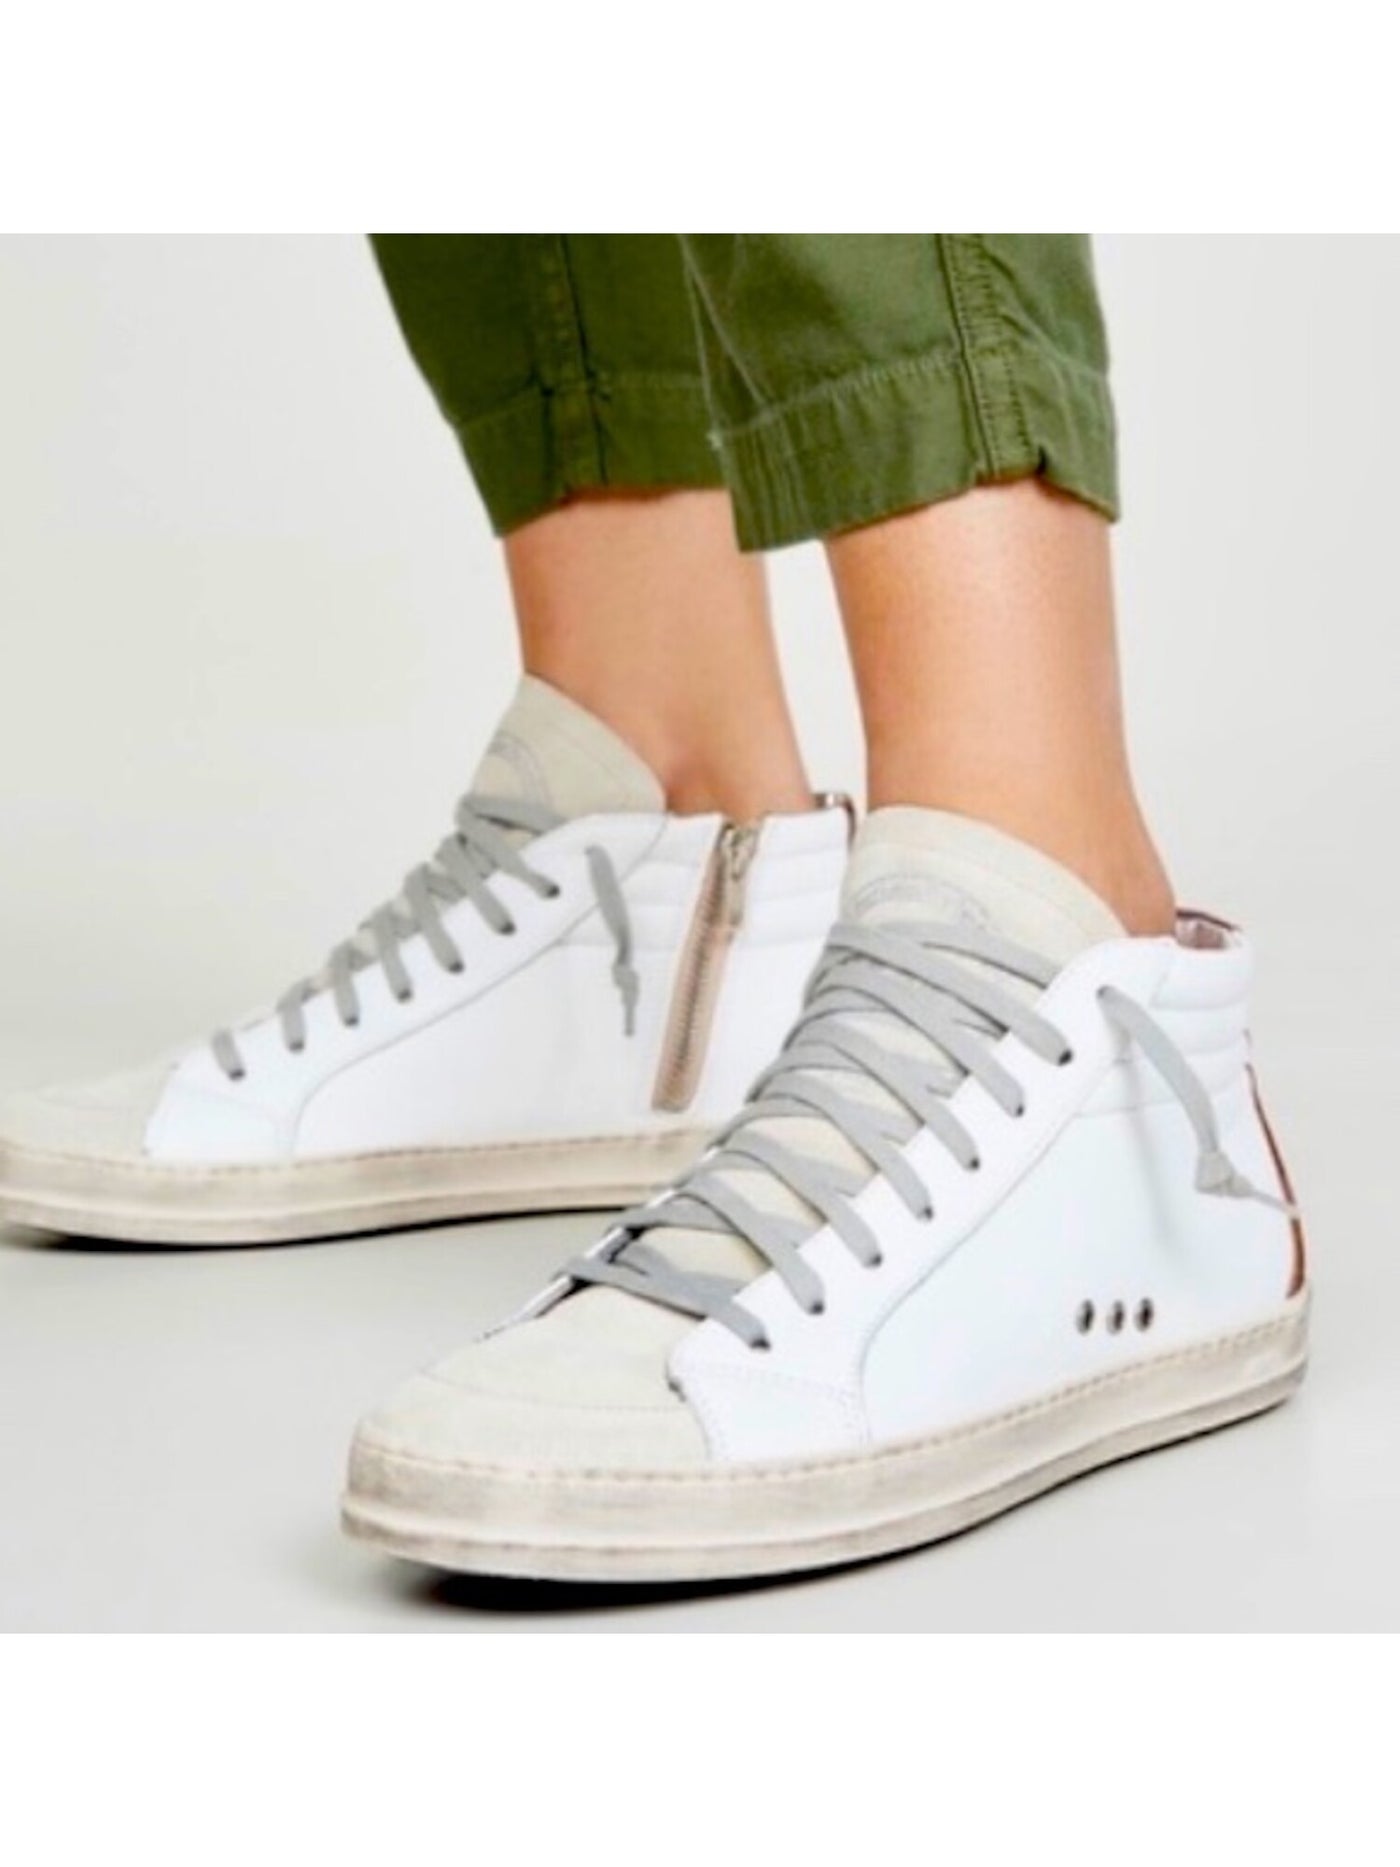 P448 Womens White Colorblock Lace Up Side Eyelets Padded Skate Round Toe Zip-Up Leather Athletic Sneakers Shoes 40